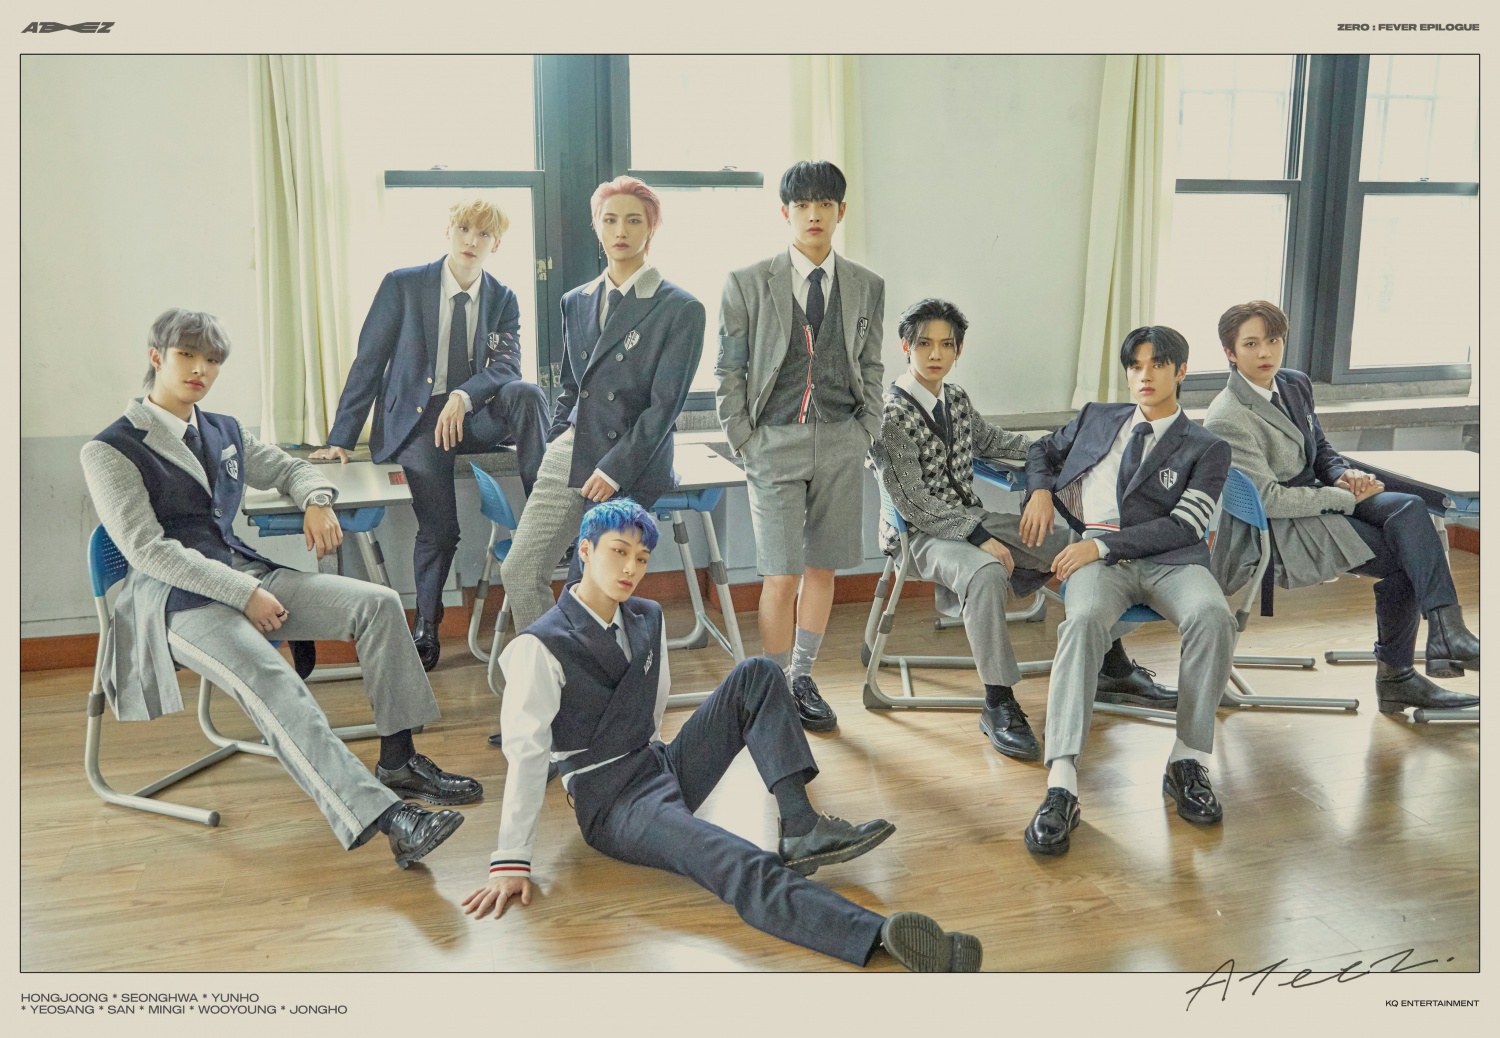 ATEEZ 'Turbulence' group concept photo released... school uniform styling